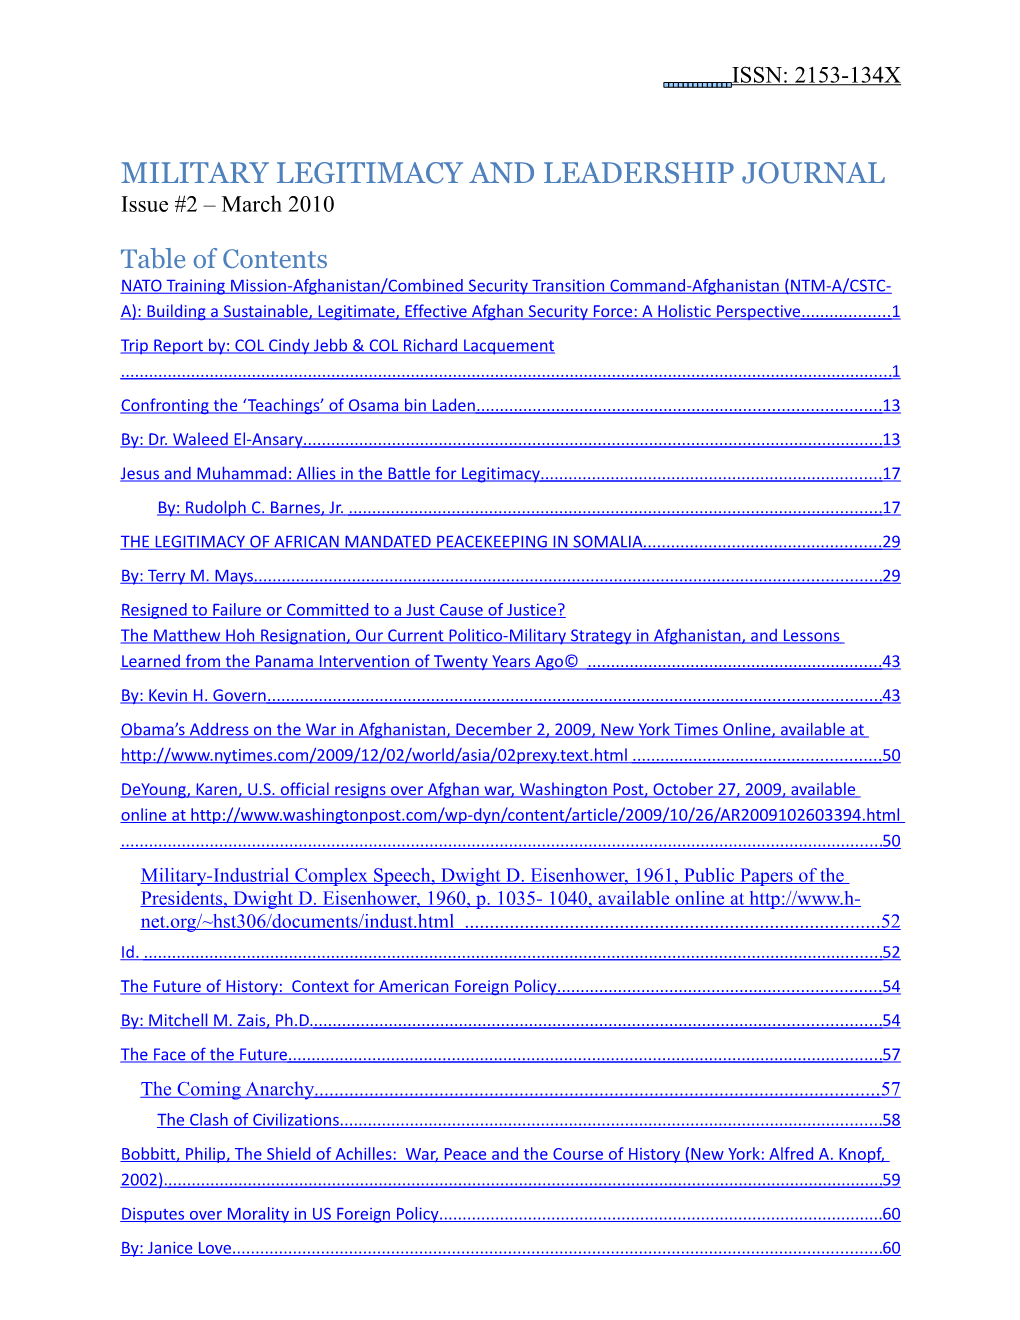 MILITARY LEGITIMACY and LEADERSHIP JOURNAL Issue #2 – March 2010